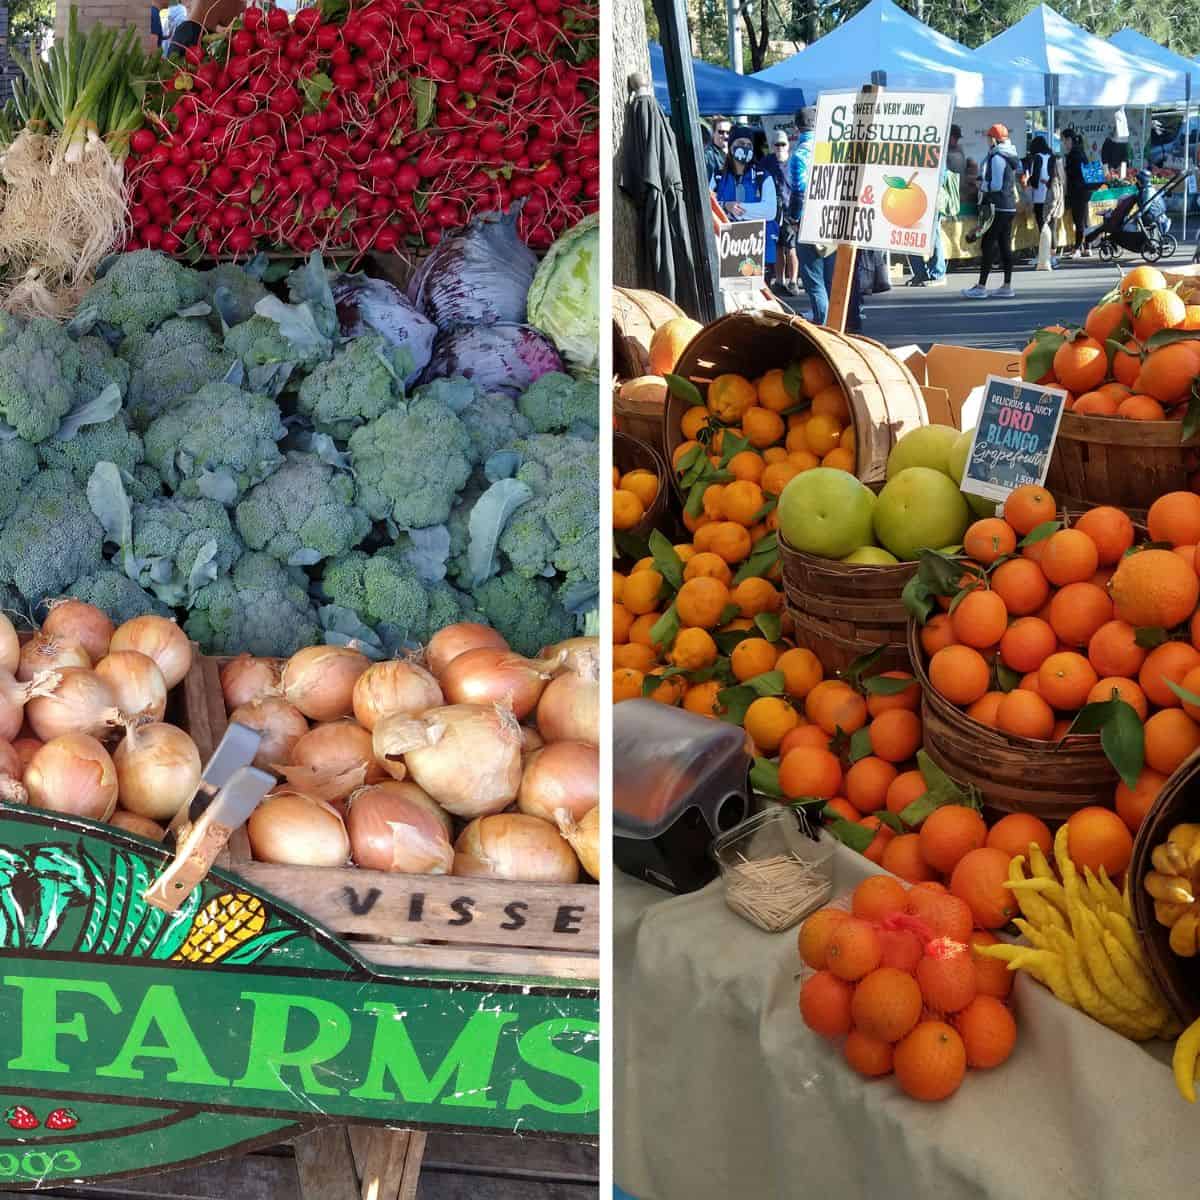 A display of fresh vegetables at a farmer's market in Michigan next to a picture of fresh citrus at a farmer's market in California.